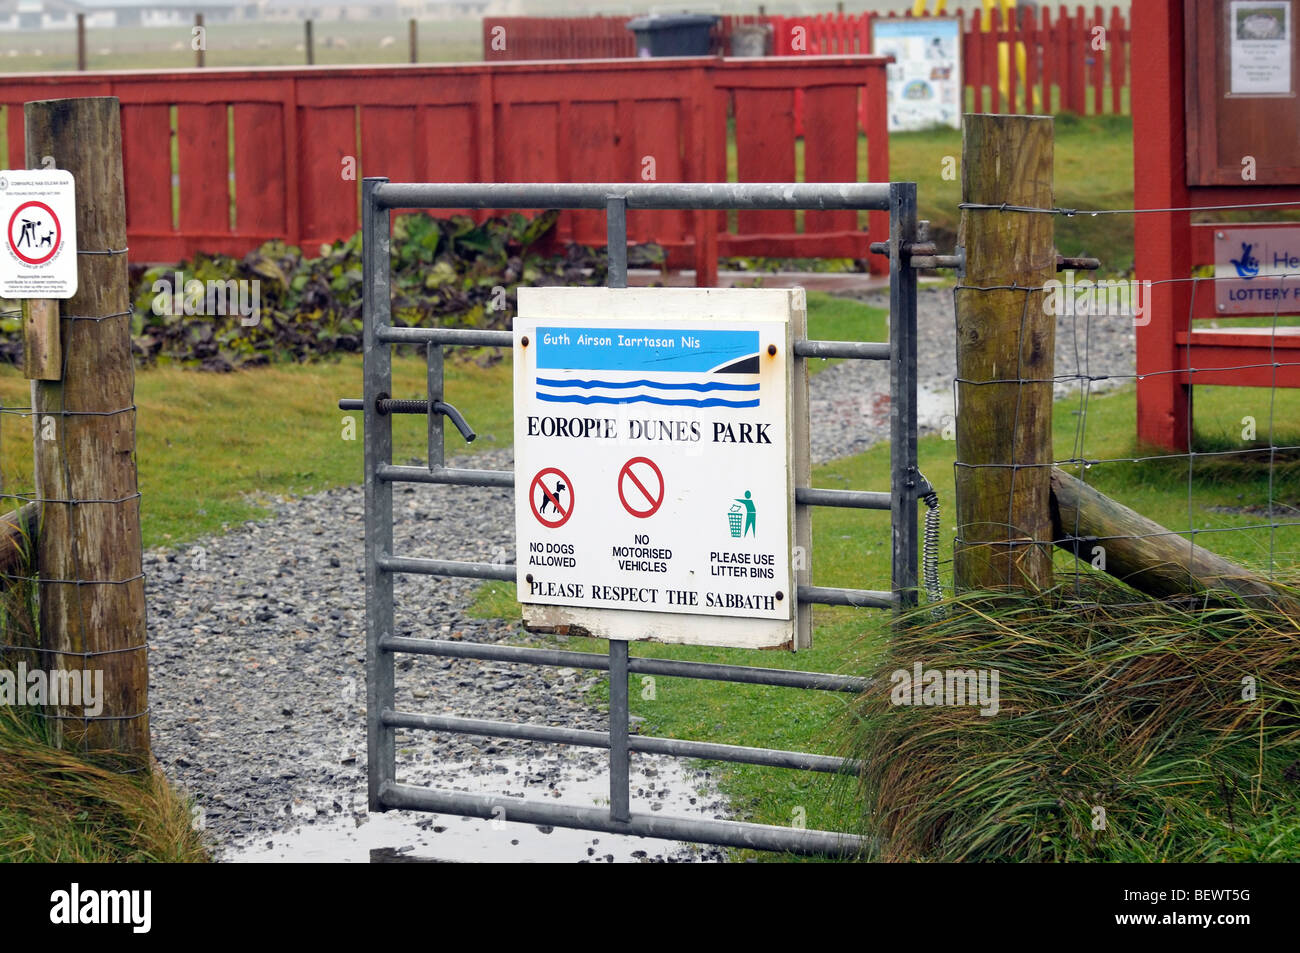 Playground sign on a gate at Eoropie in the Isle of Lewis requesting observance of the Sabbath Stock Photo